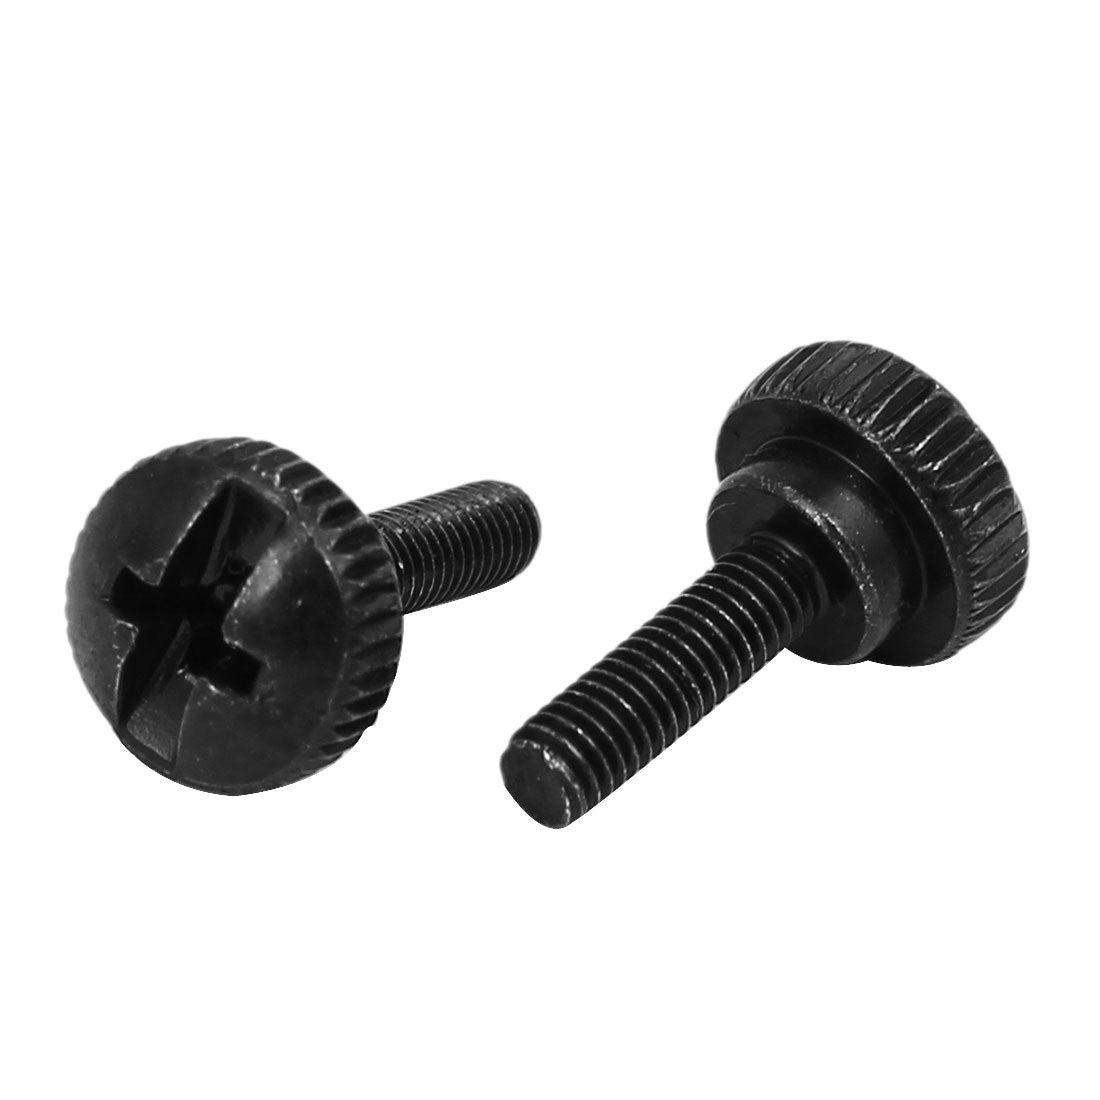 Uxcell Uxcell M3 x 10mm Knurled Phillips Head Thumb Screw Black 20pcs for Computer PC Case